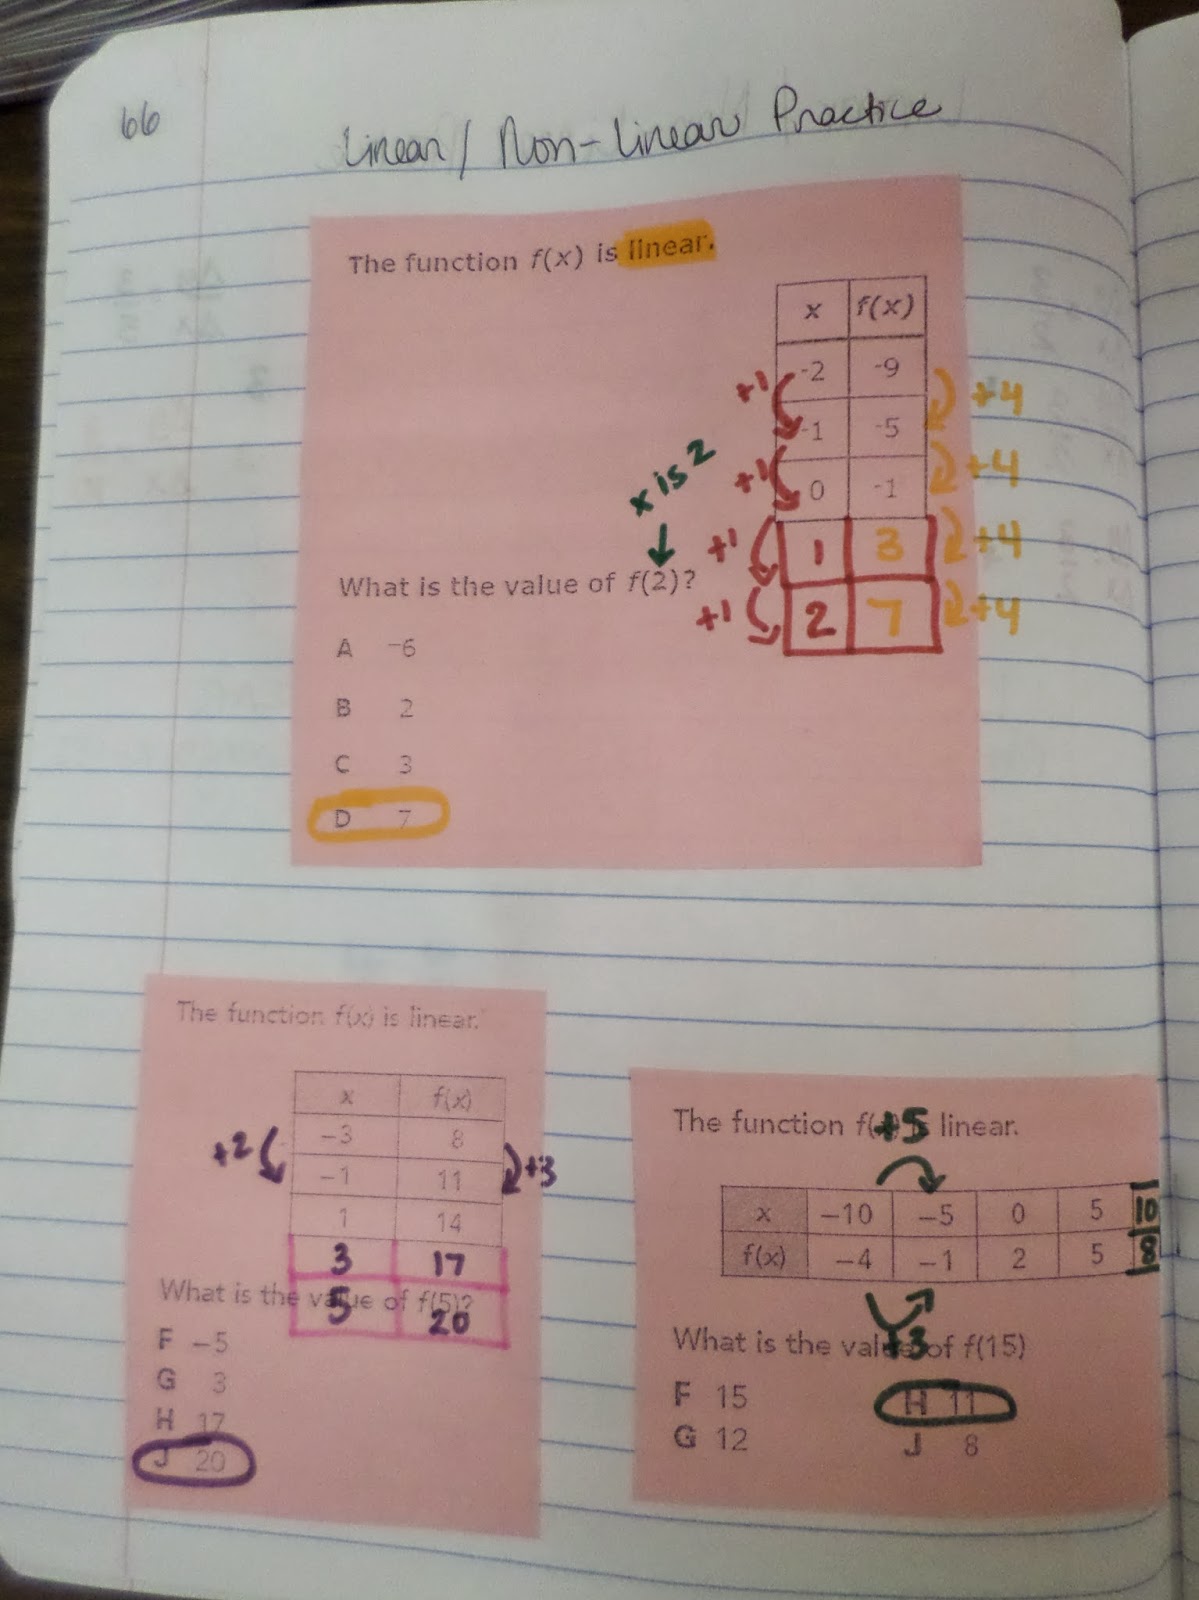 linear vs non-linear practice interactive notebook page for algebra 1 